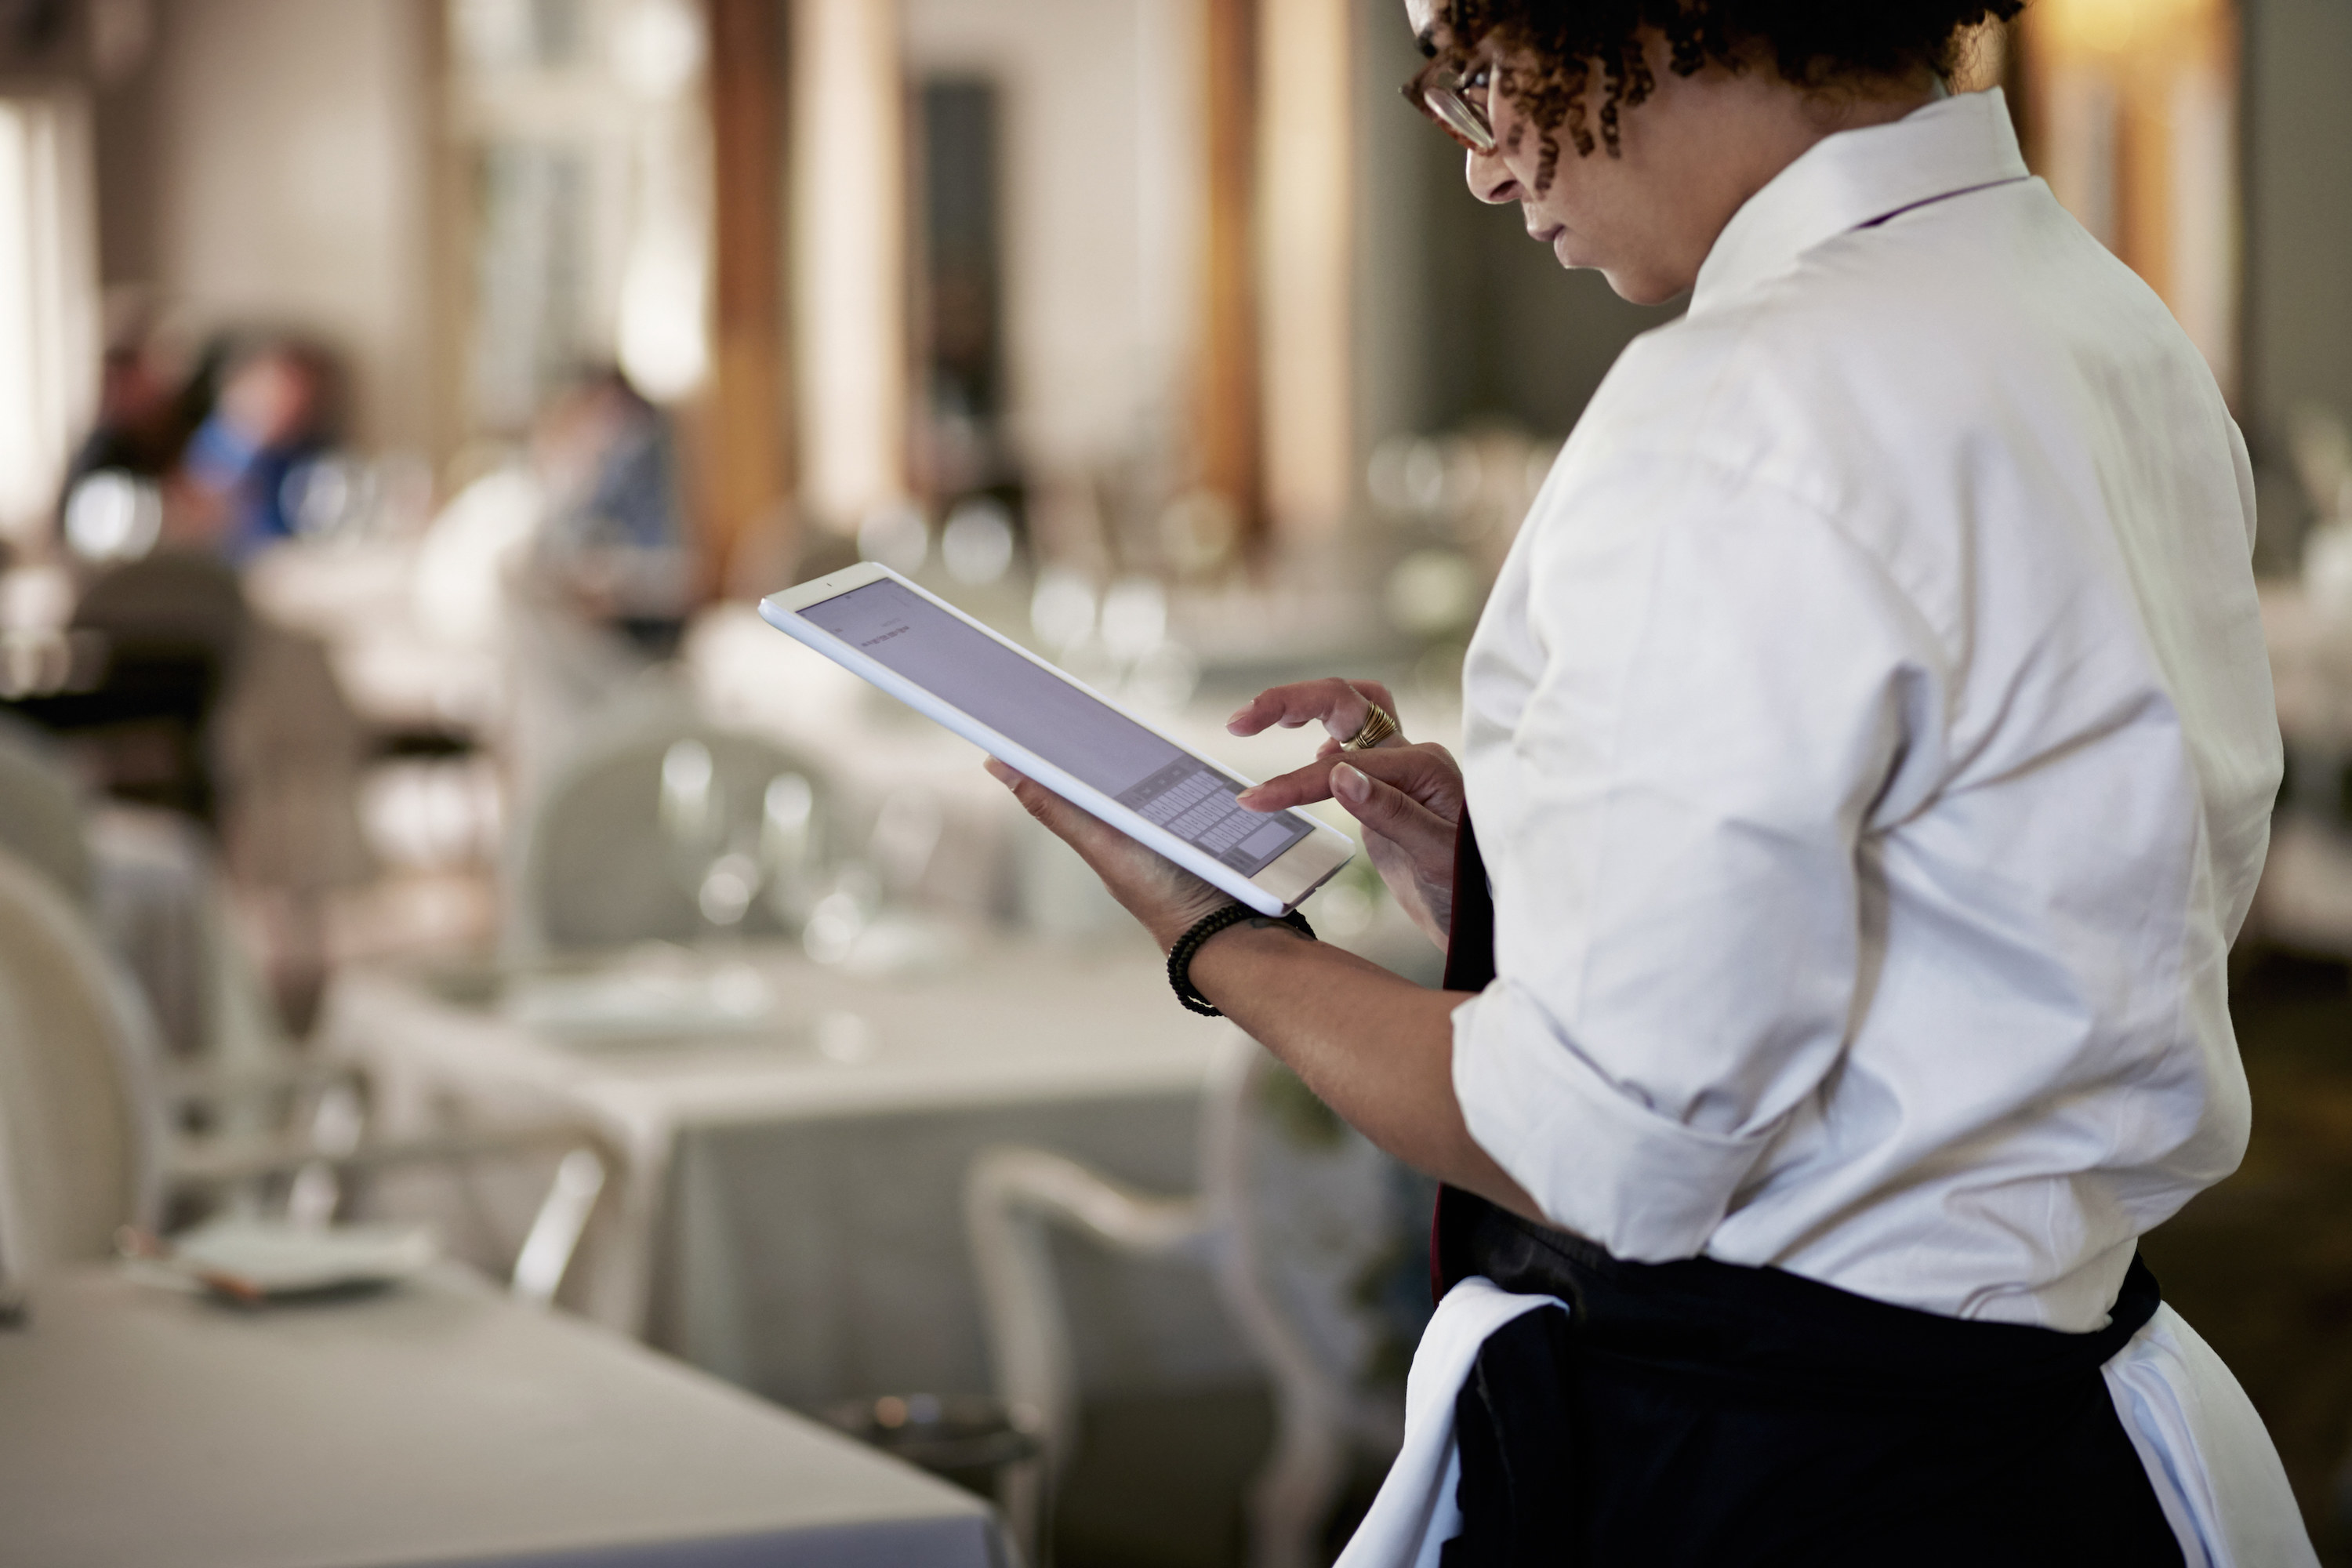 A server putting in an order on an iPad